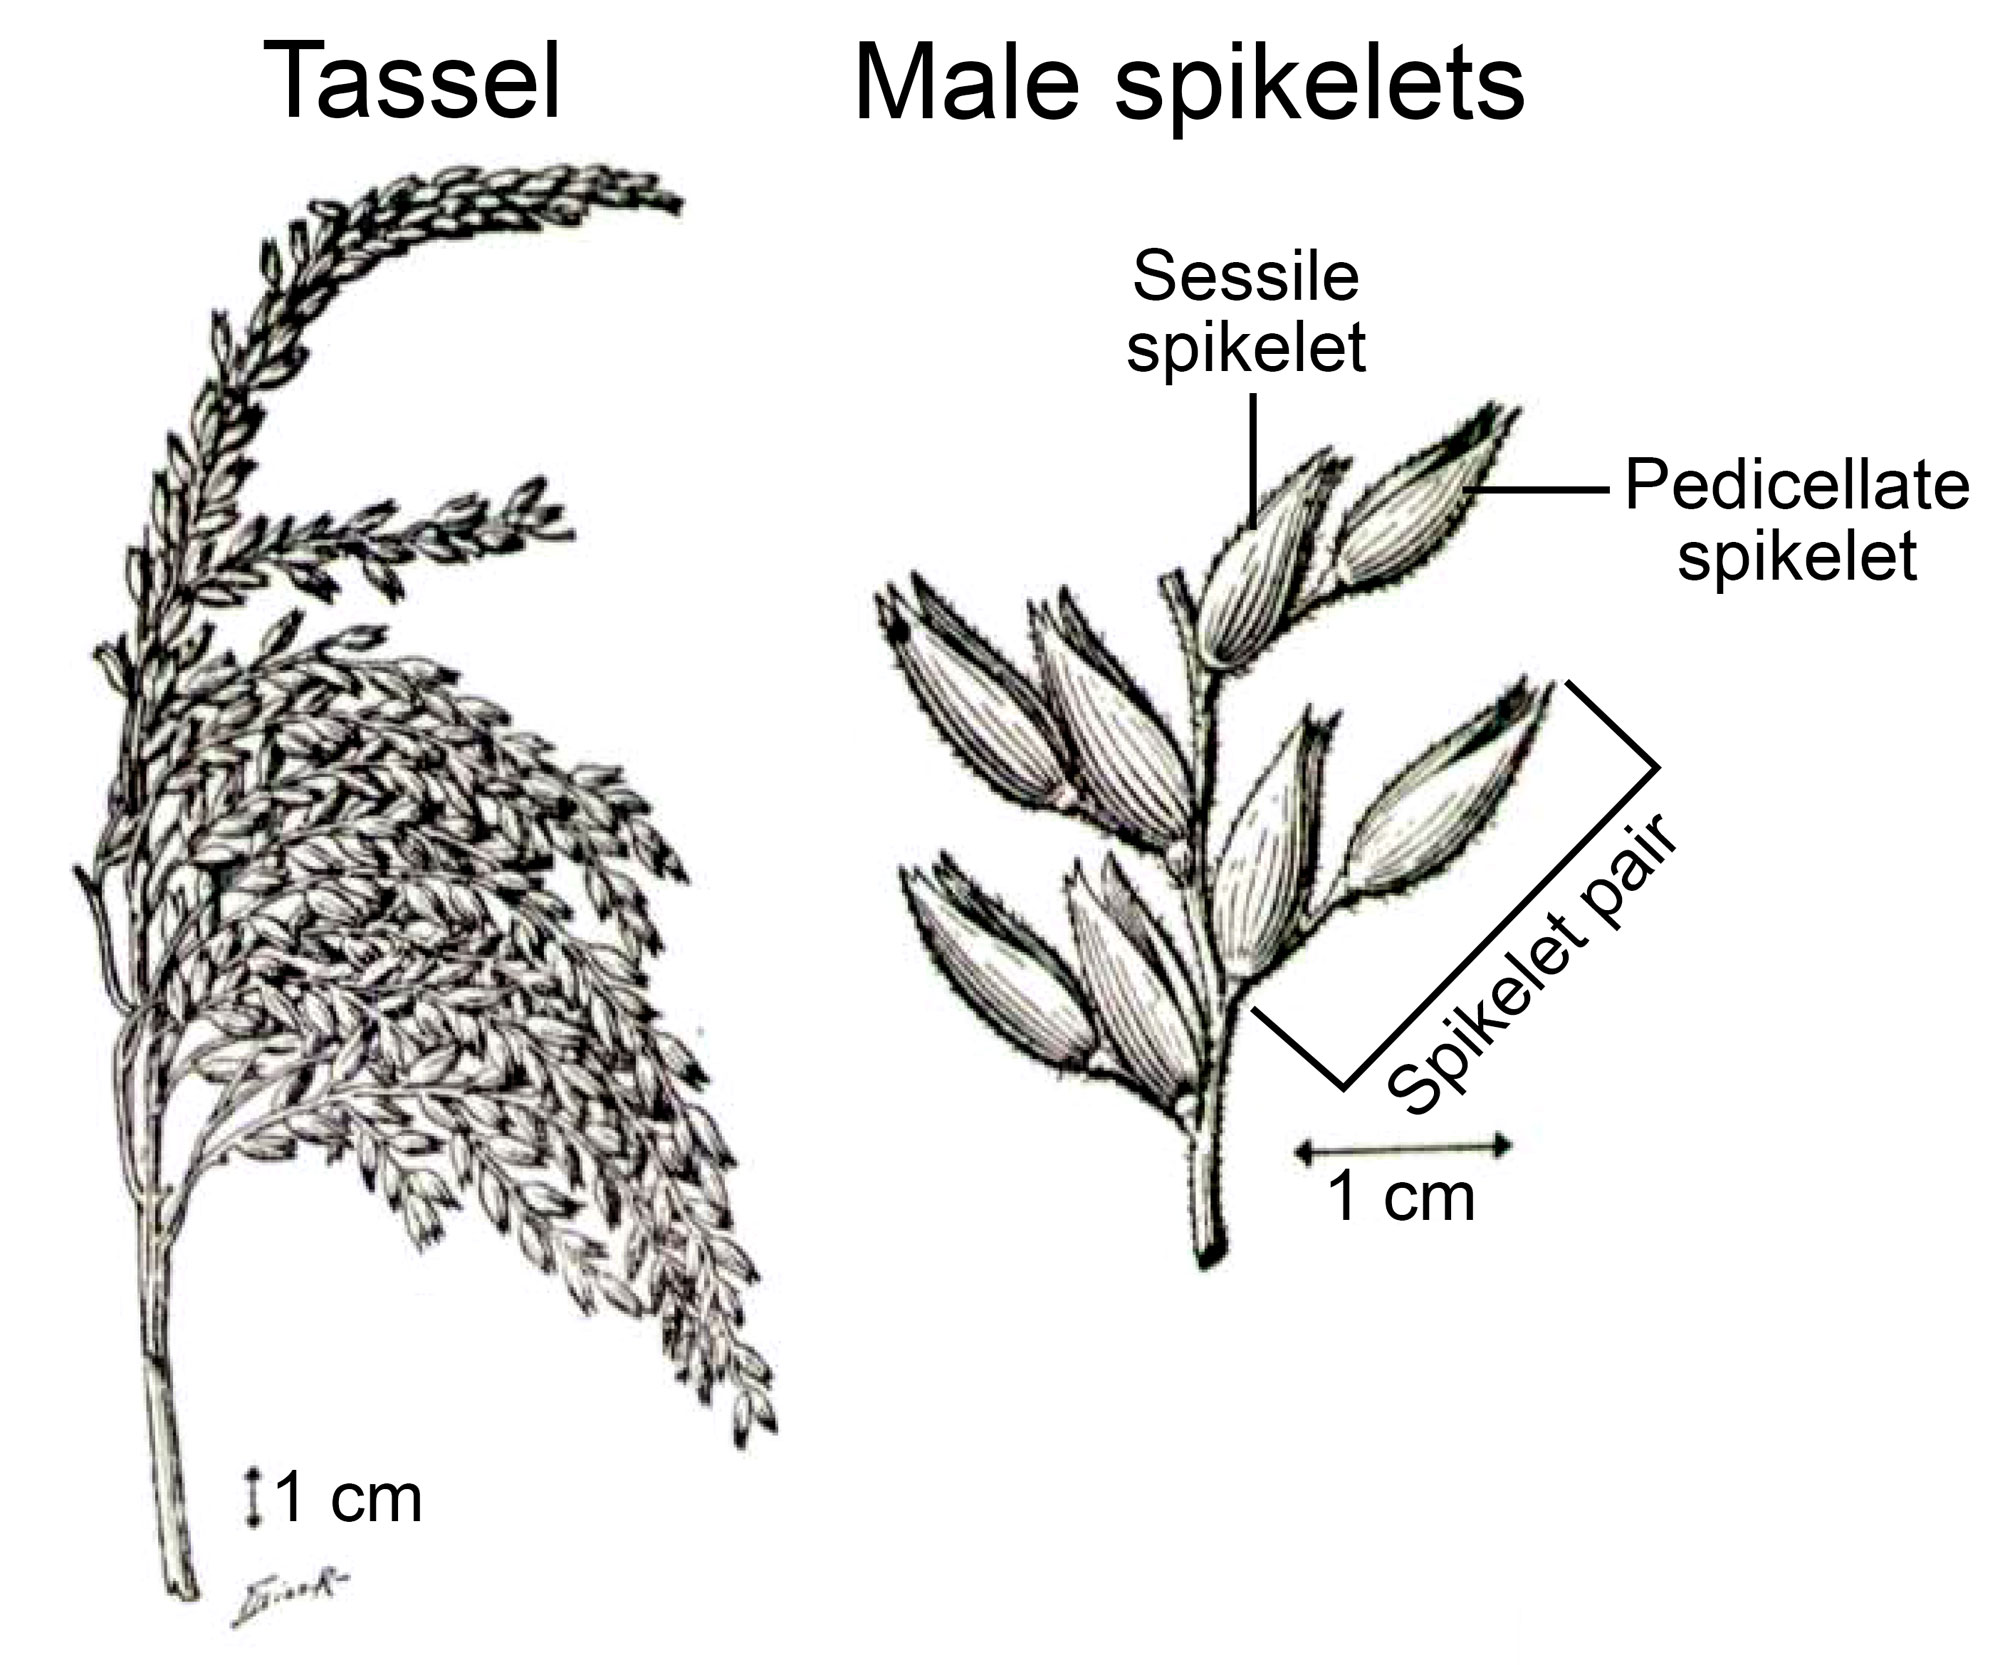 Line drawings of a tassel and a detail of a portion of a branch bearing pairs of male spikelets. The tassel has multiple branches, each bearing multiple pairs of spikelets. The detail shows a delicate branch with two pairs of male spikelets borne alternately on each side. Each pair of spikelets includes one sessile and one pedicellate spikelet.